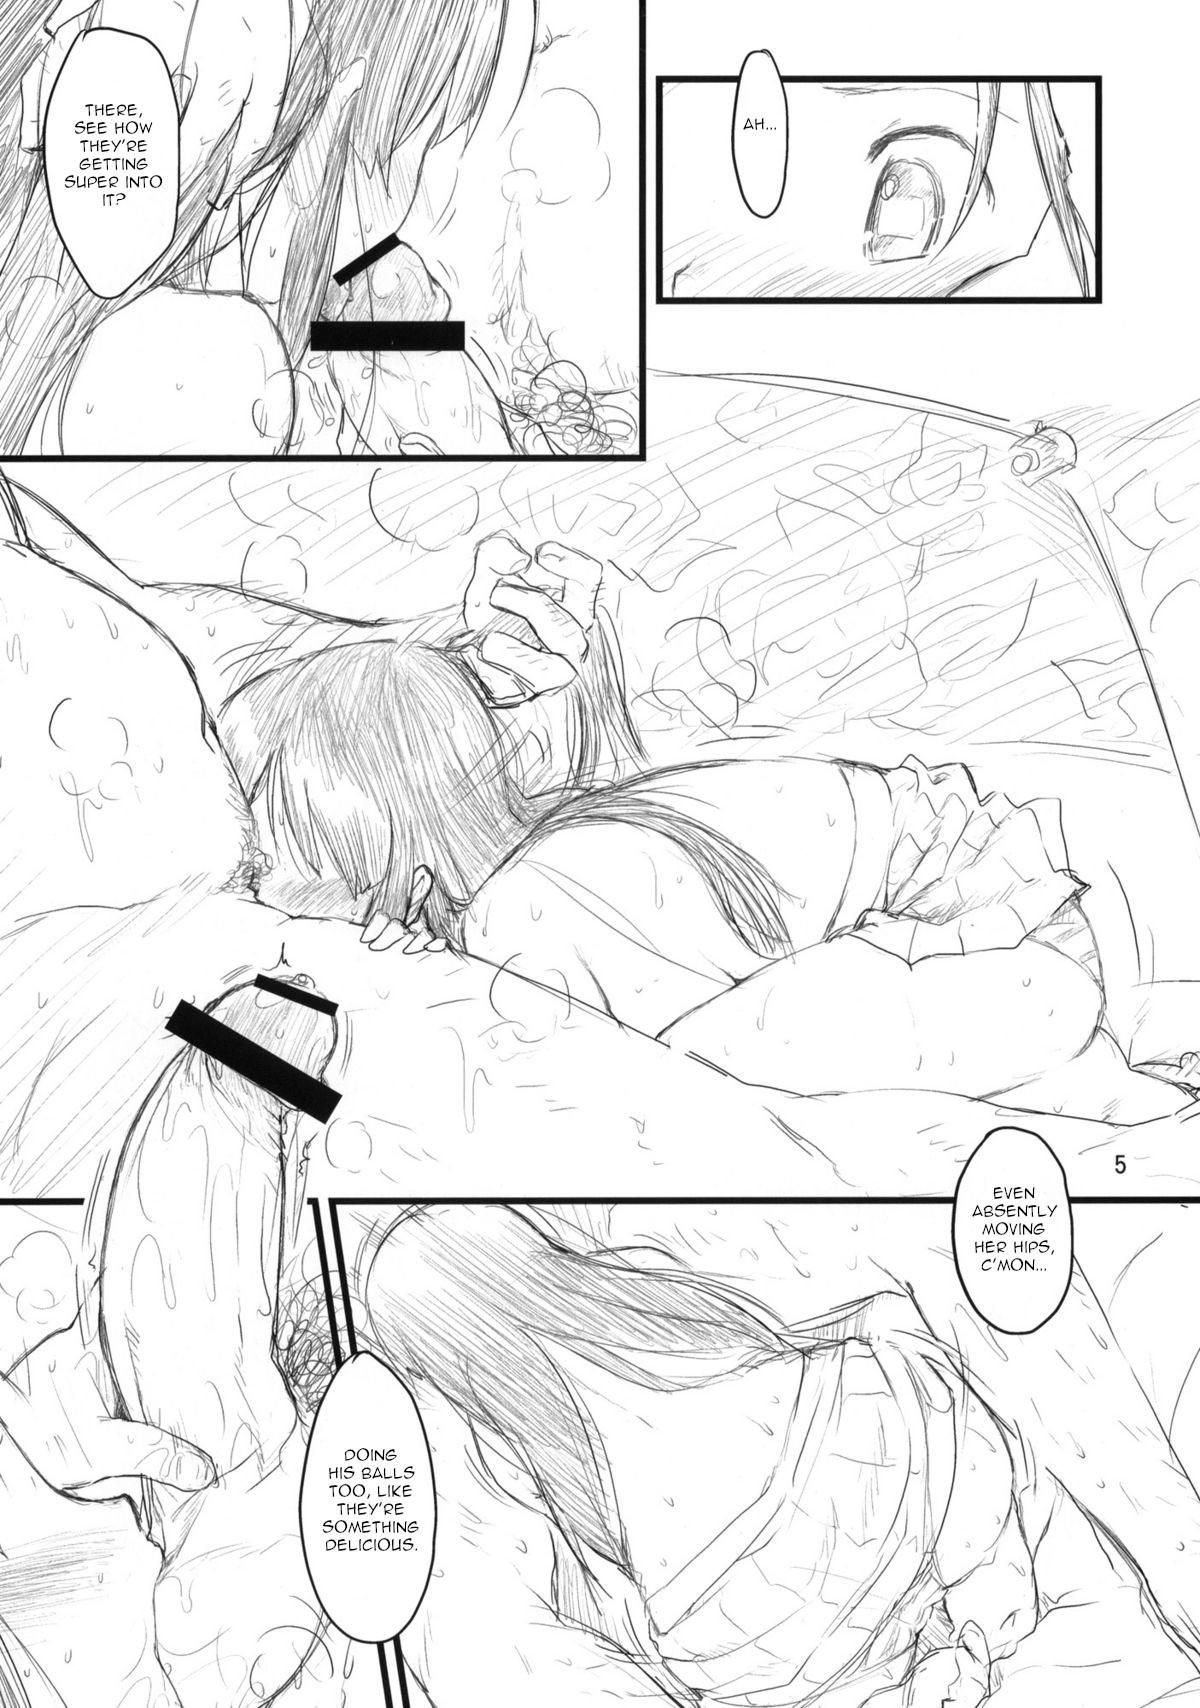 Flaca MY STARRY GIRL 2 - K on Lesbos - Page 6